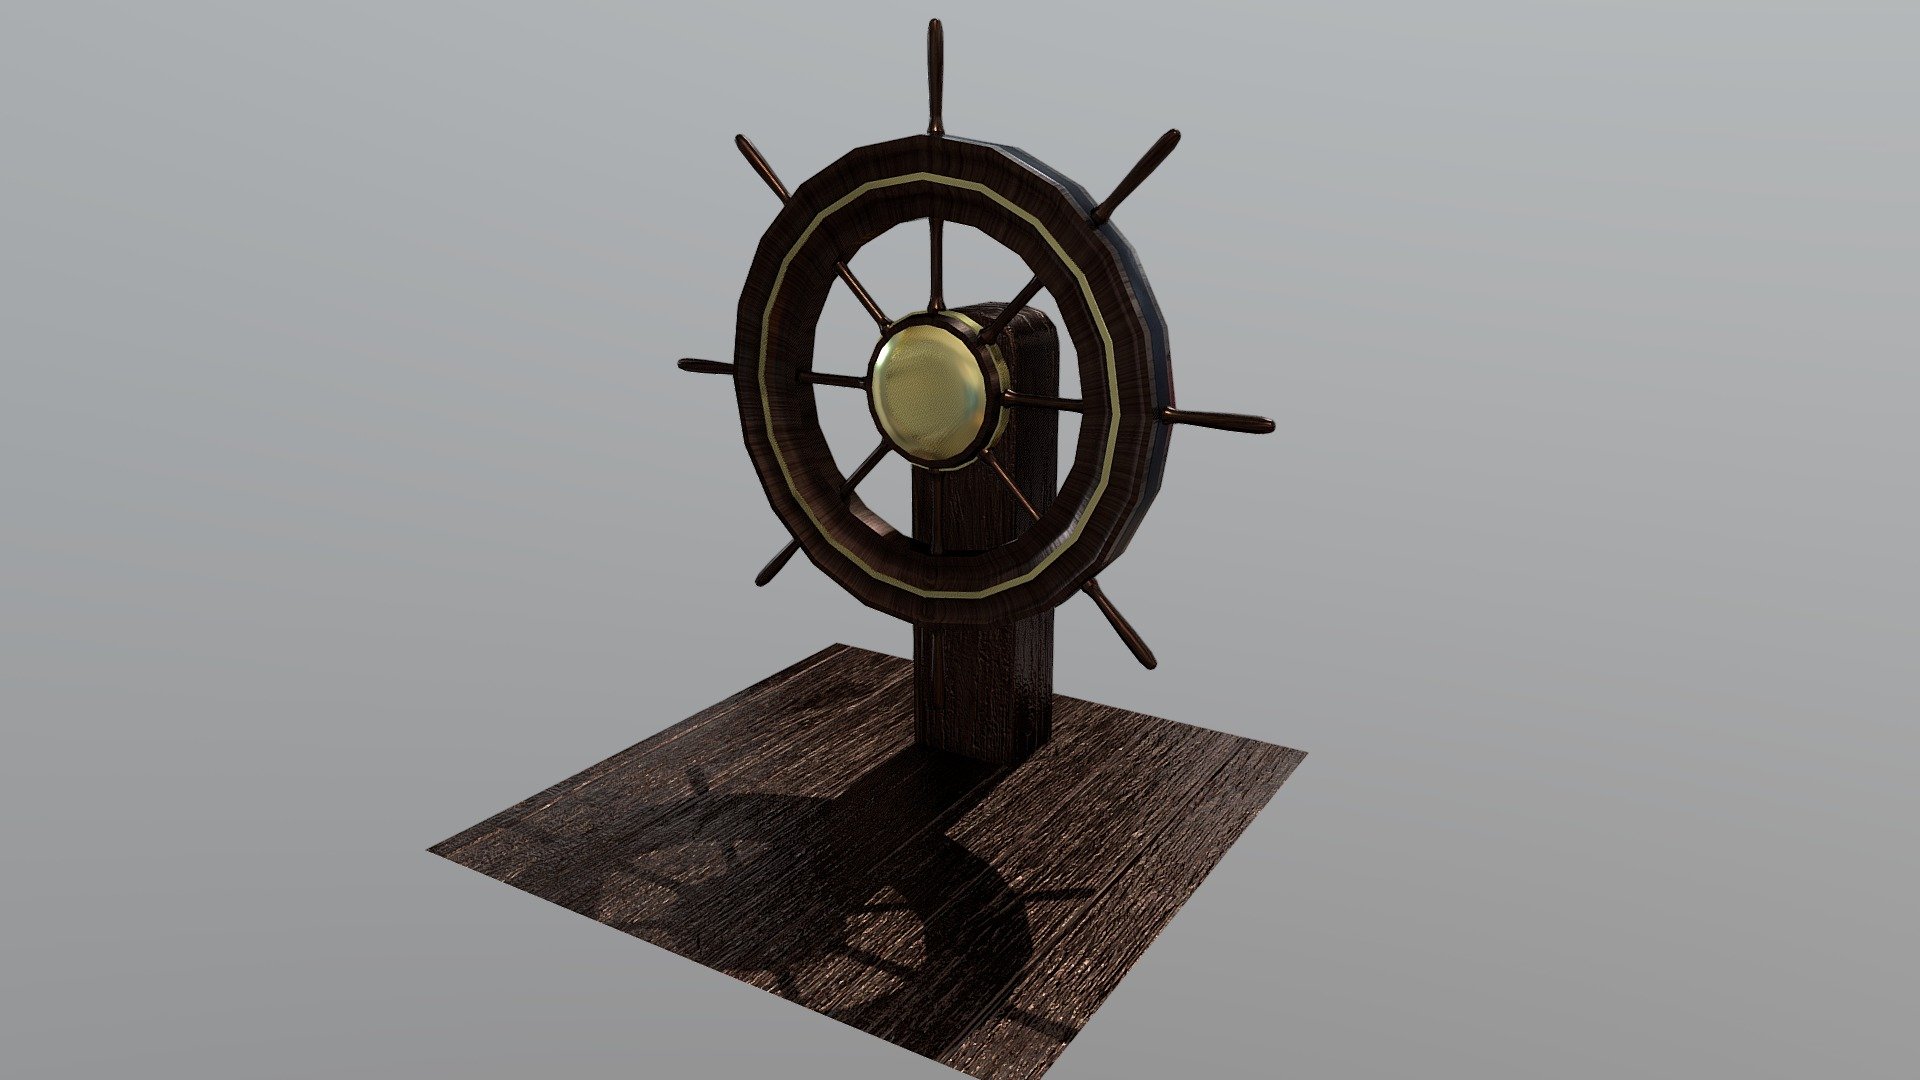 Ahoy! Today we're taking a nautical theme with a ship's helm. Hope your days are all smooth sailing, viewer! o7 - Ship's Helm - 3D model by Myaskill 3d model